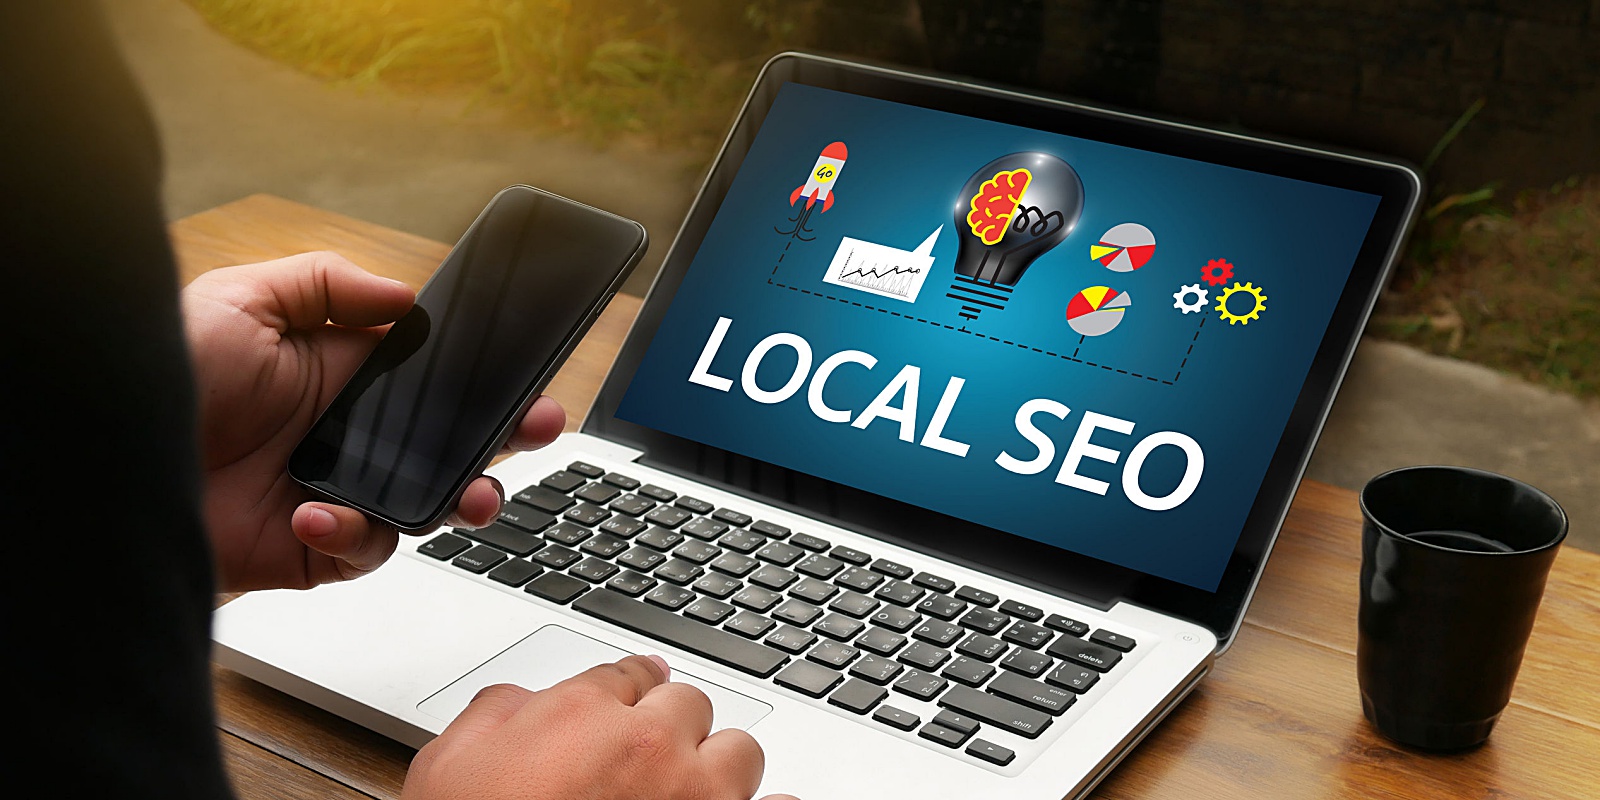 Types of businesses that need SEO services